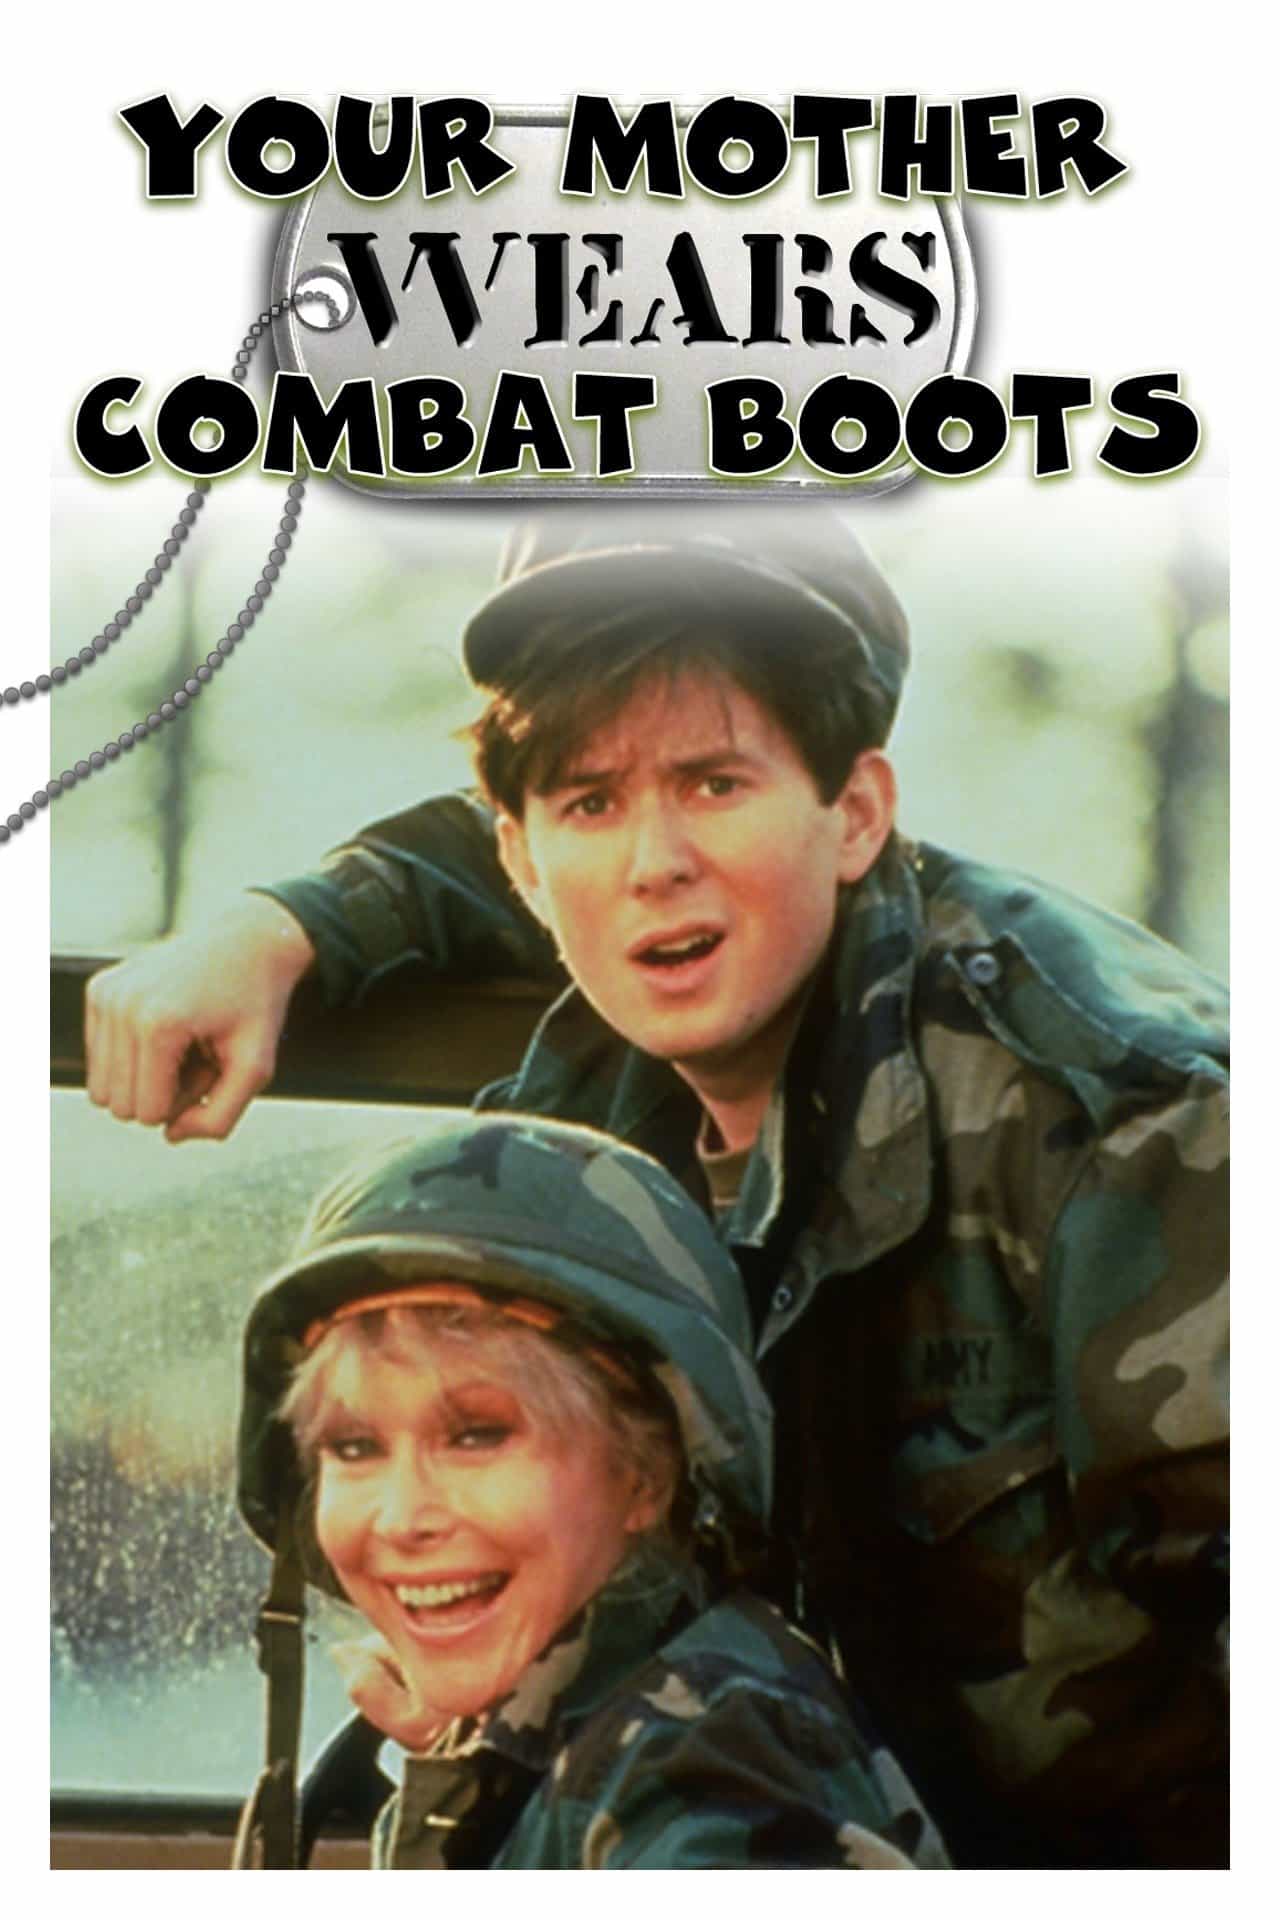 Your Mother Wears Combat Boots